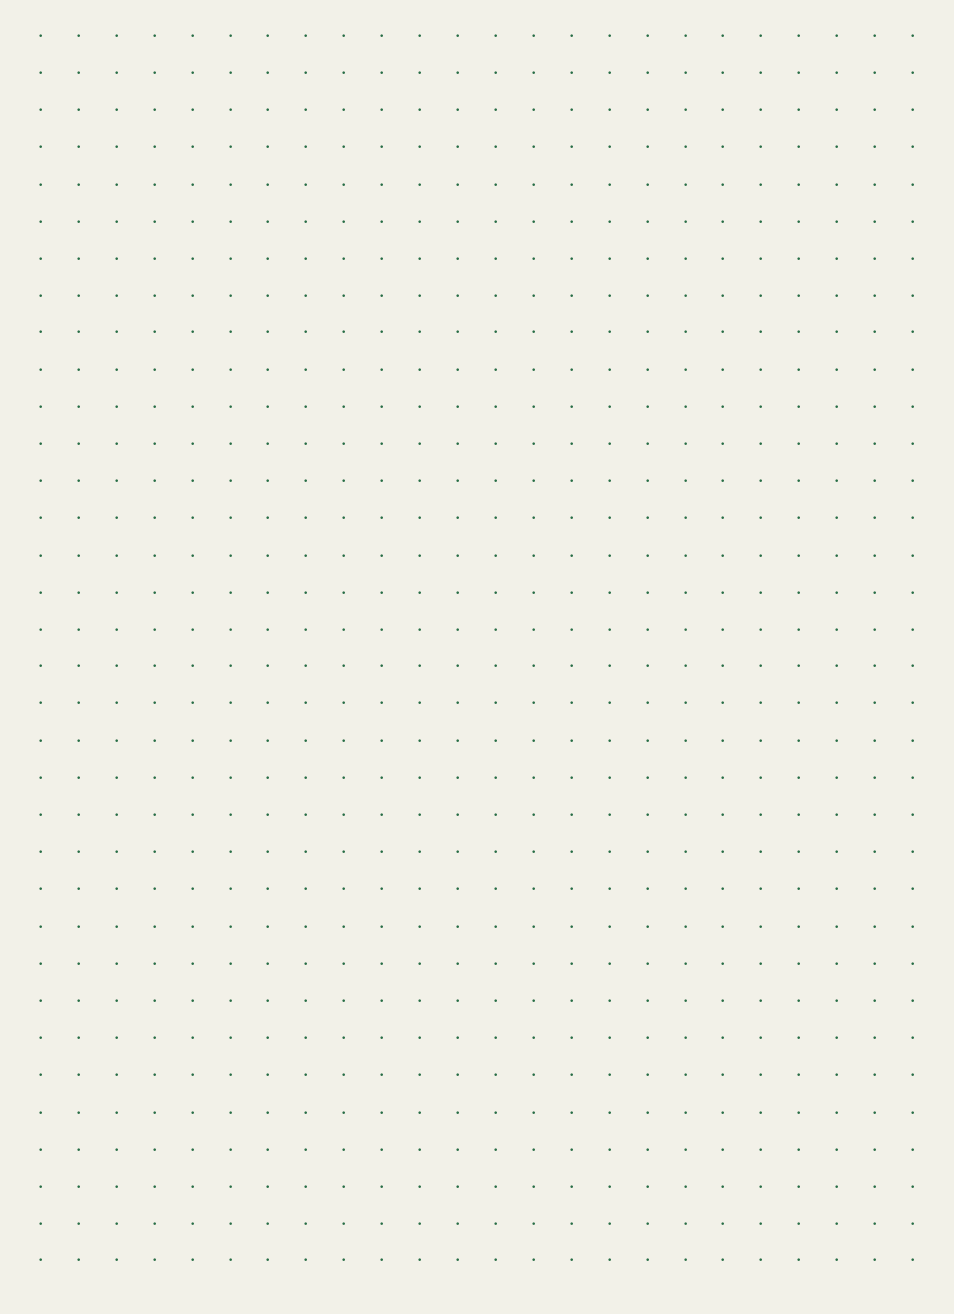 5x7 Dotted Grid Notebook - Camellia Matcha